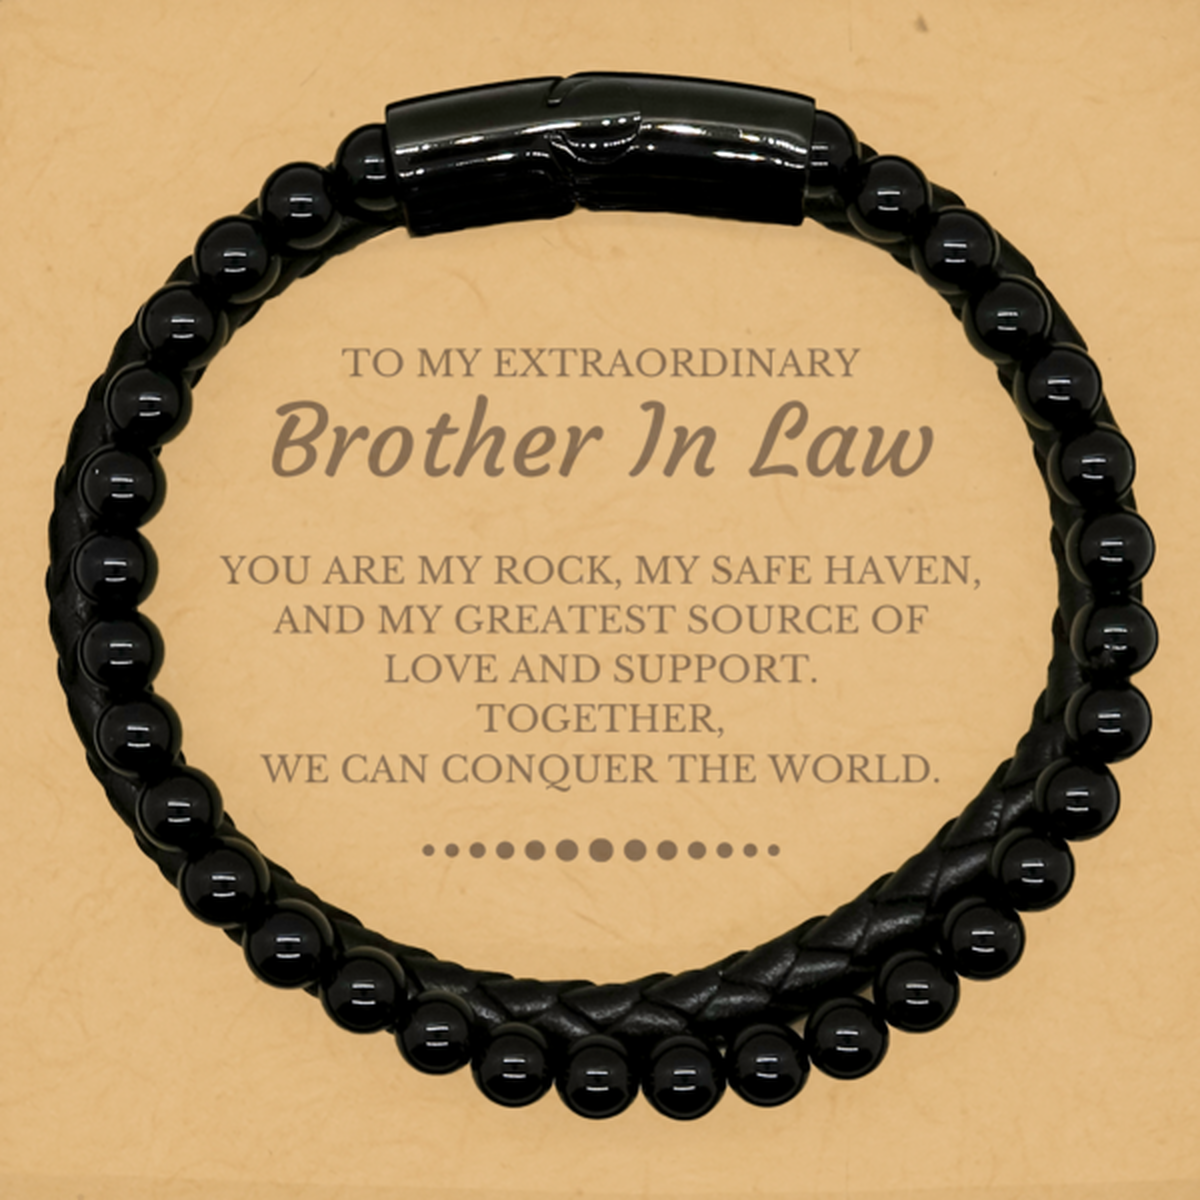 To My Extraordinary Brother In Law Gifts, Together, we can conquer the world, Birthday Stone Leather Bracelets For Brother In Law, Christmas Gifts For Brother In Law